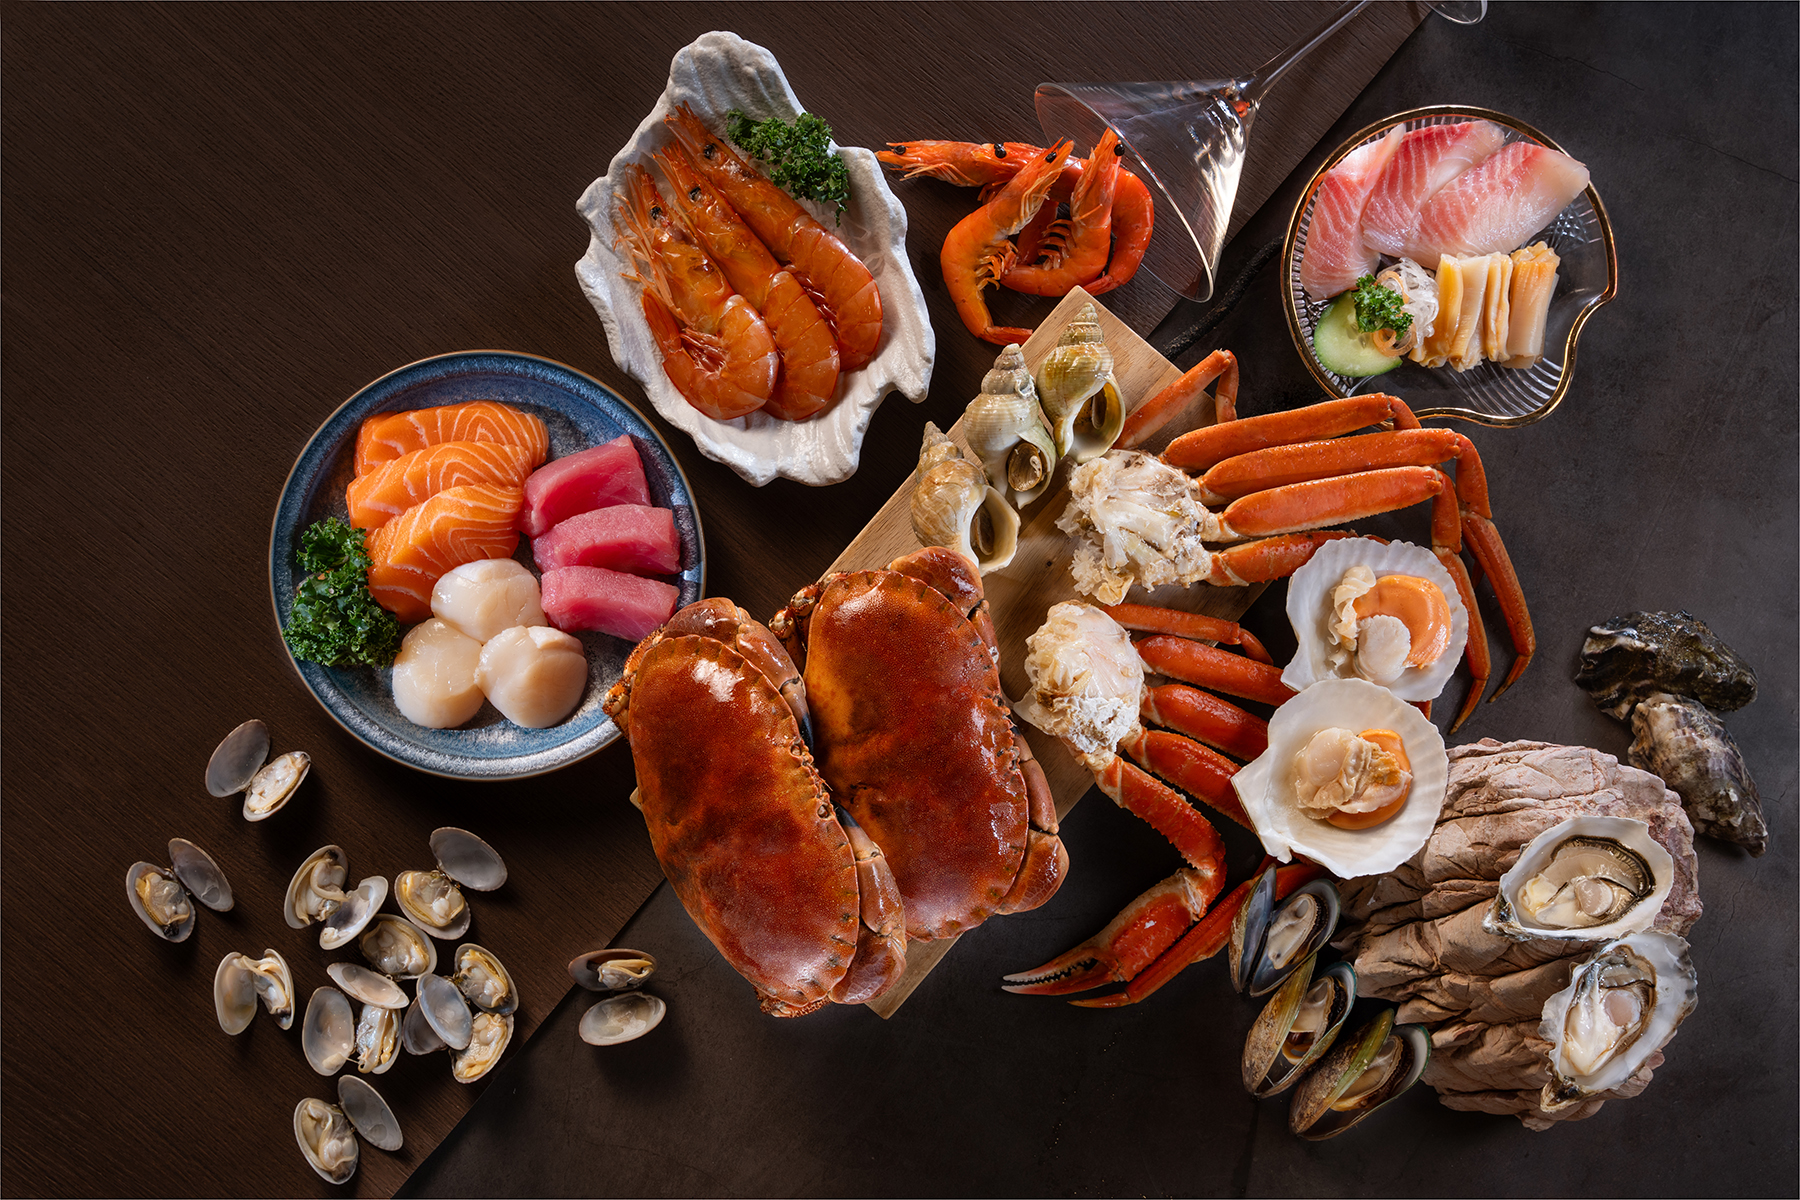 Prepay “Oysterlicious” lunch buffet, ‘Berrylicious’ afternoon tea buffet and “Seafood Extravaganza” dinner buffet now to enjoy 25% off on weekday and 20% off on weekend, 20% off on tea buffet. Don’t miss it and BUY NOW!